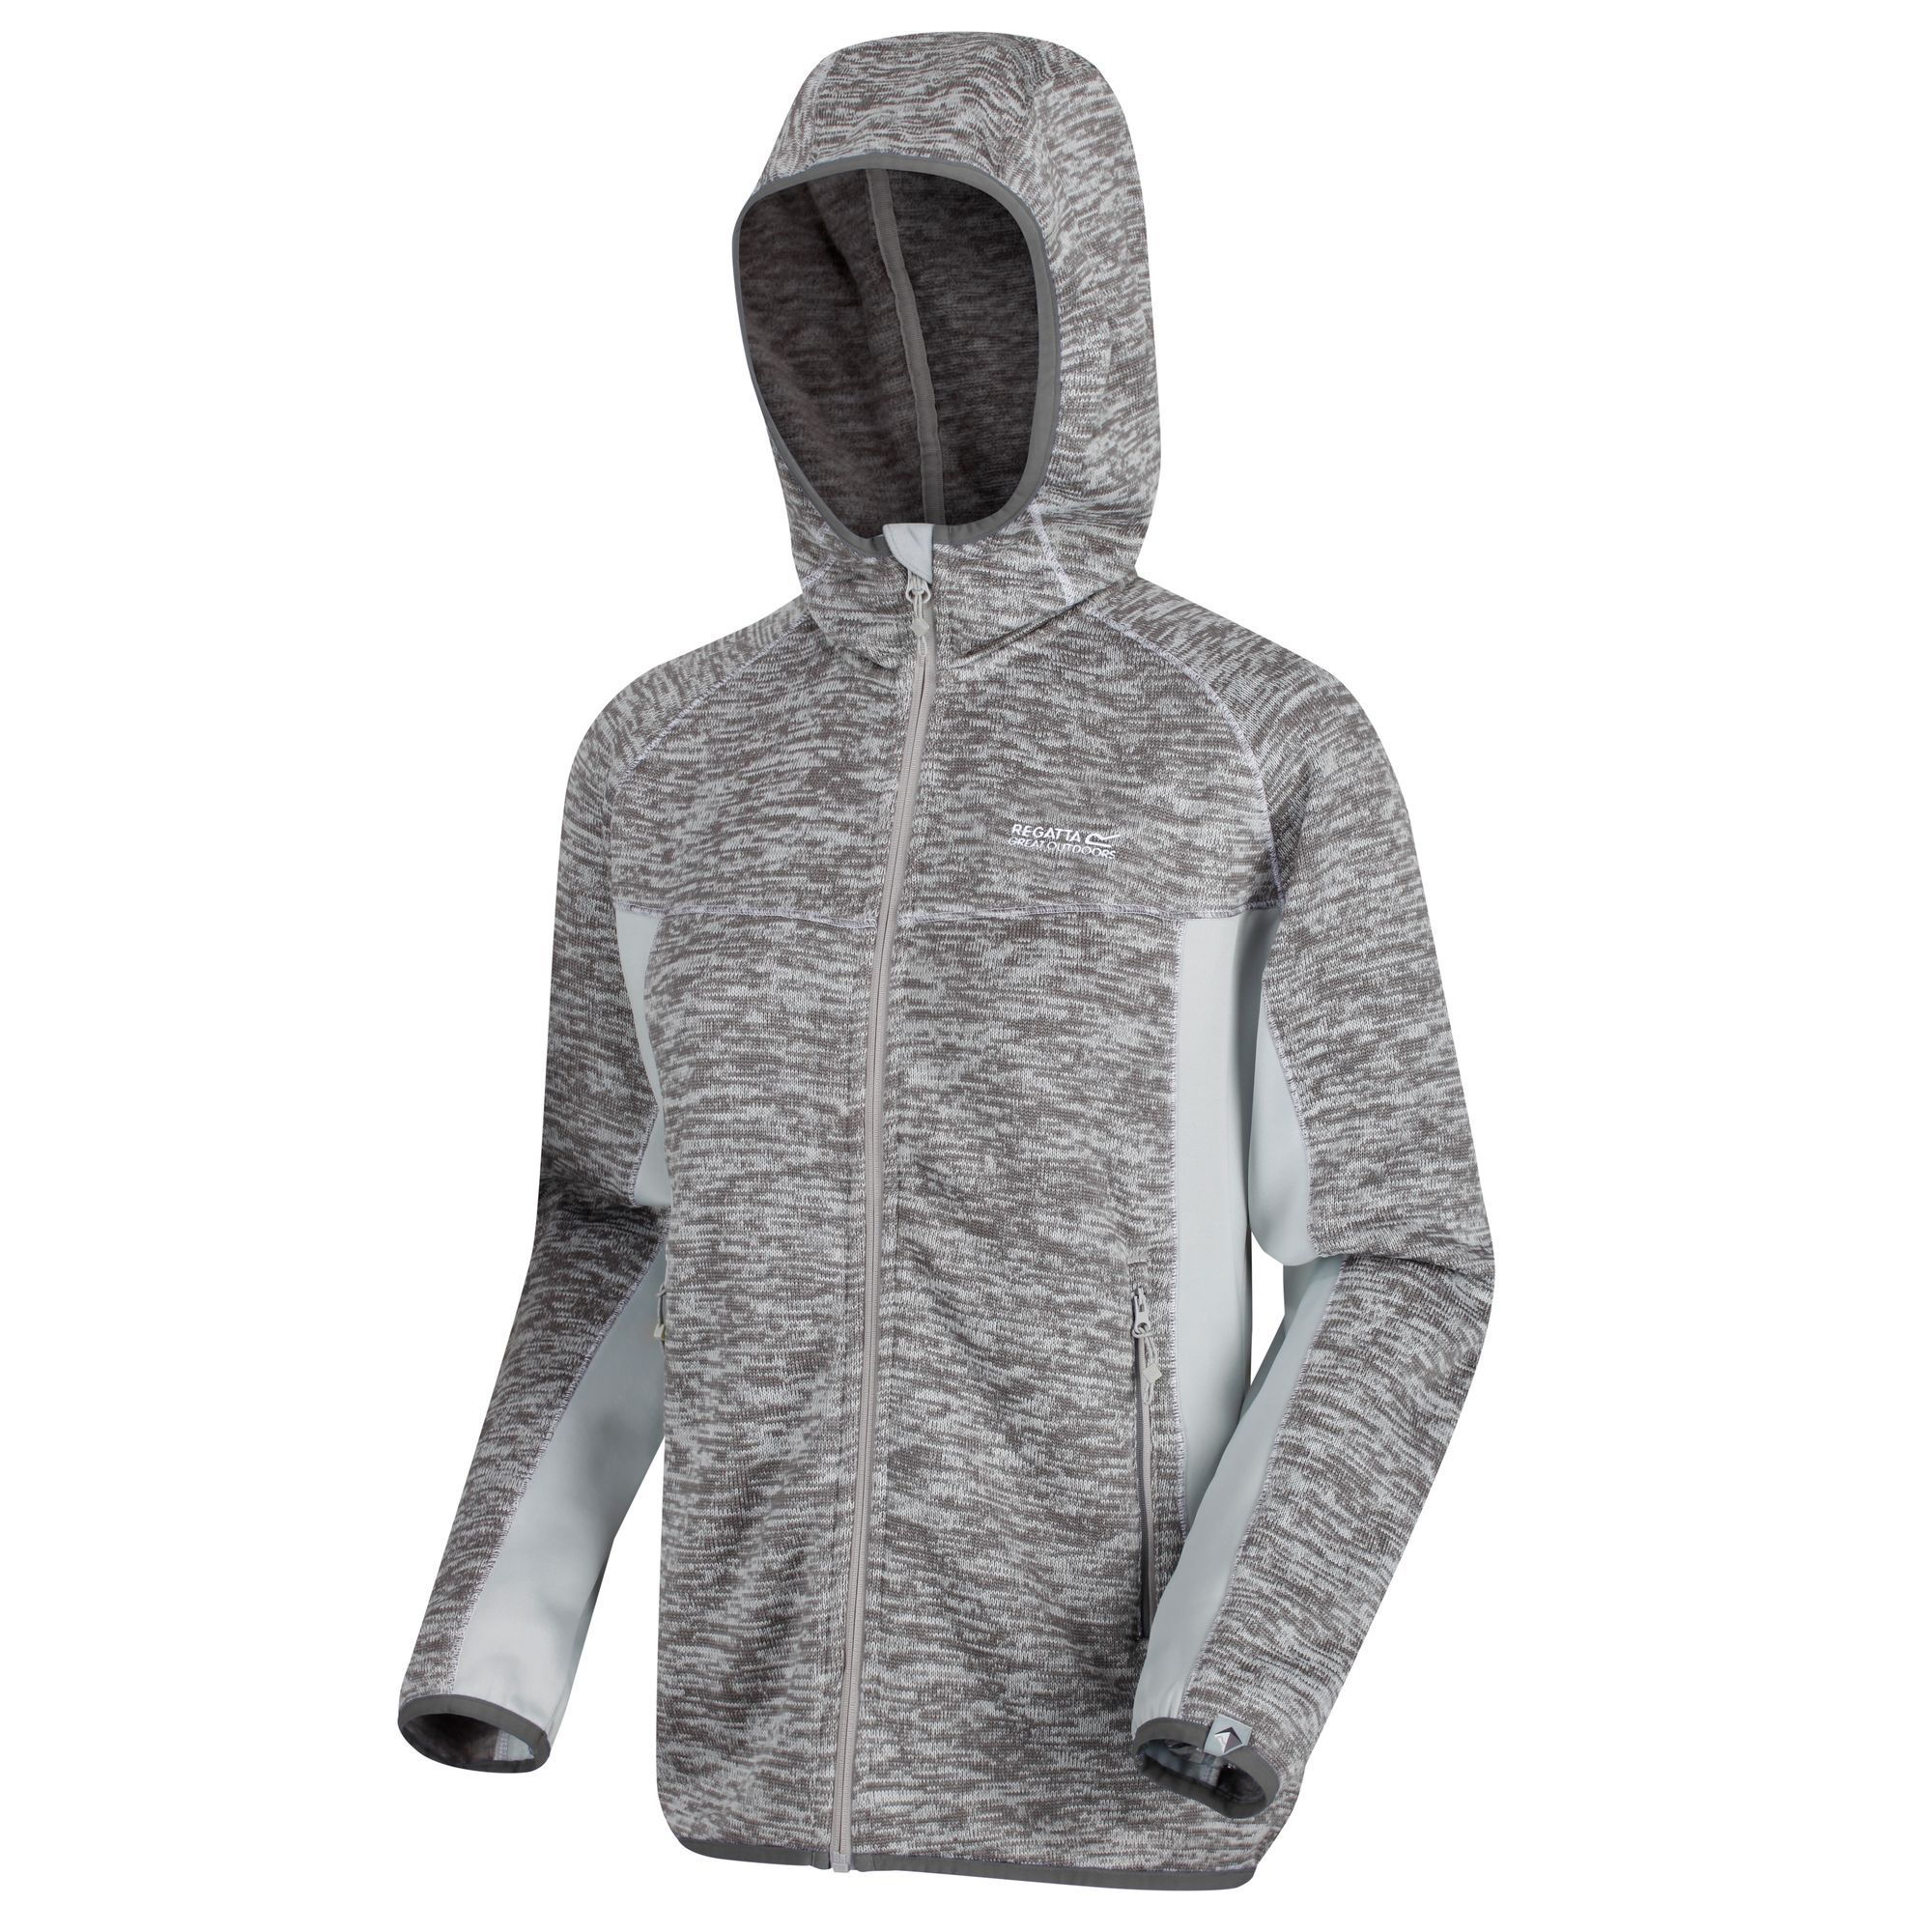 Womens hooded fleece made of 265gsm Polyester marl knit effect material. Extol stretch side, hood, and underarm panels. Grown on hood. 2 zipped lower pockets. Stretch binding to hood opening, cuffs, and hem. Ideal for wearing outdoors on a cold day. 100% Polyester.